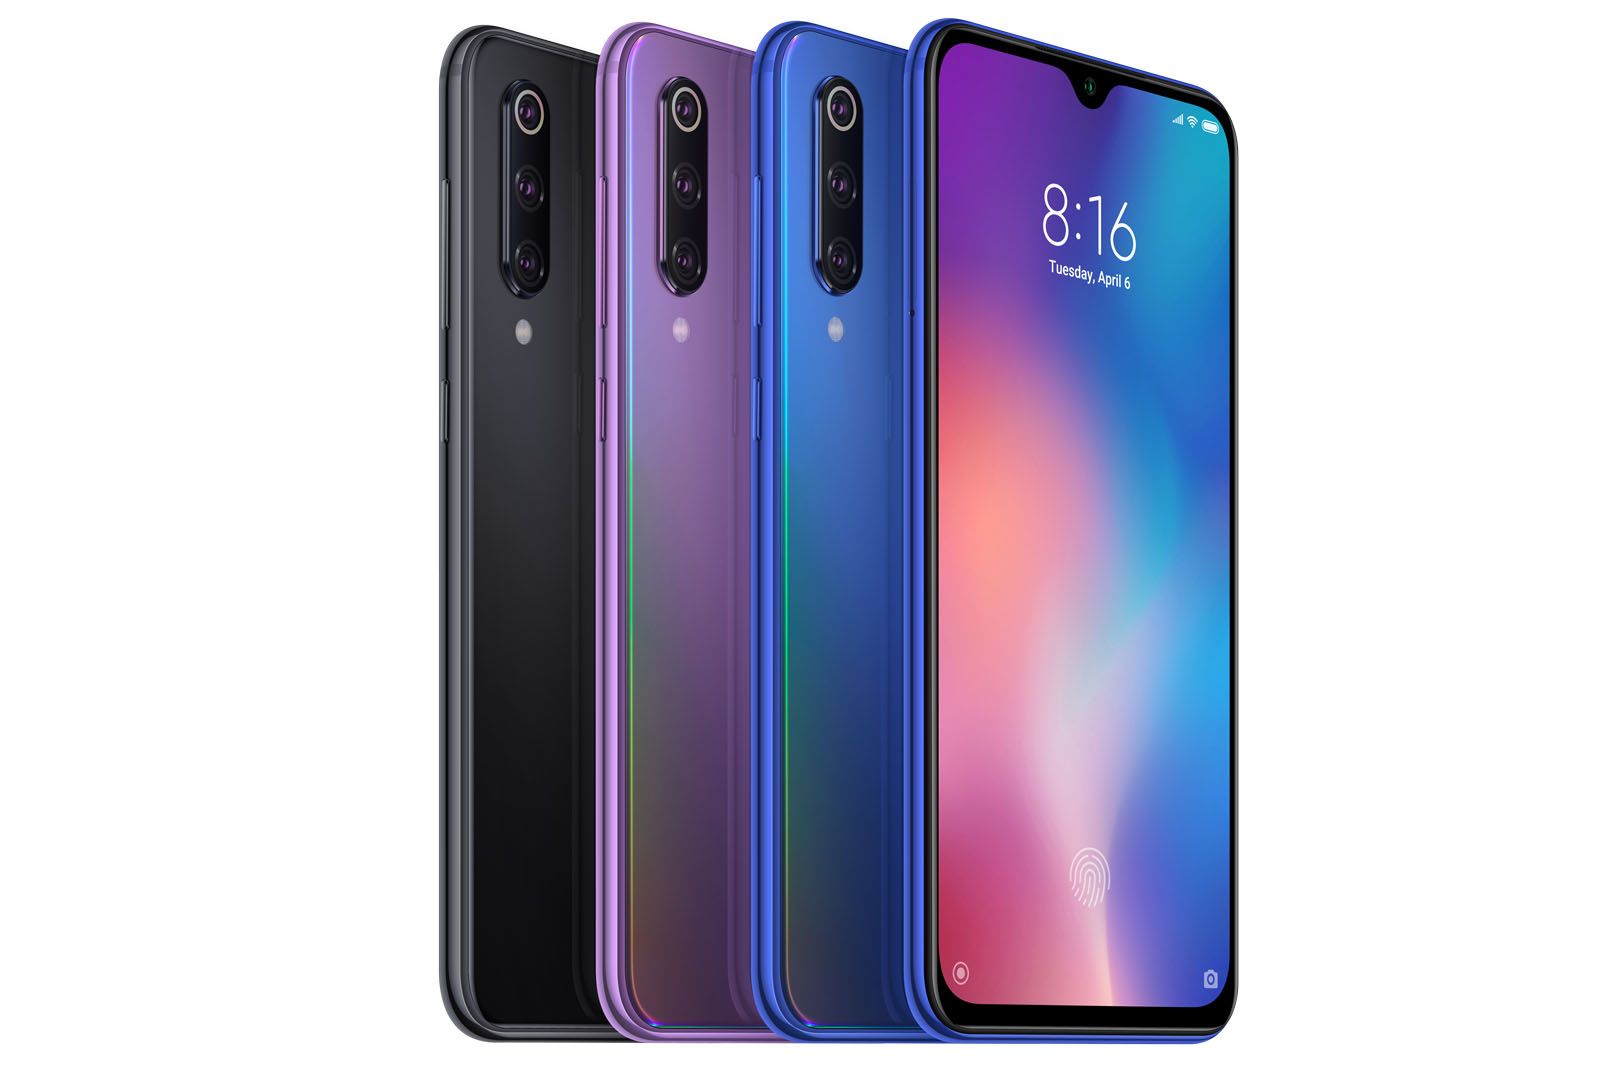 Xiaomi is bringing another Mi 9 version to the UK image 2